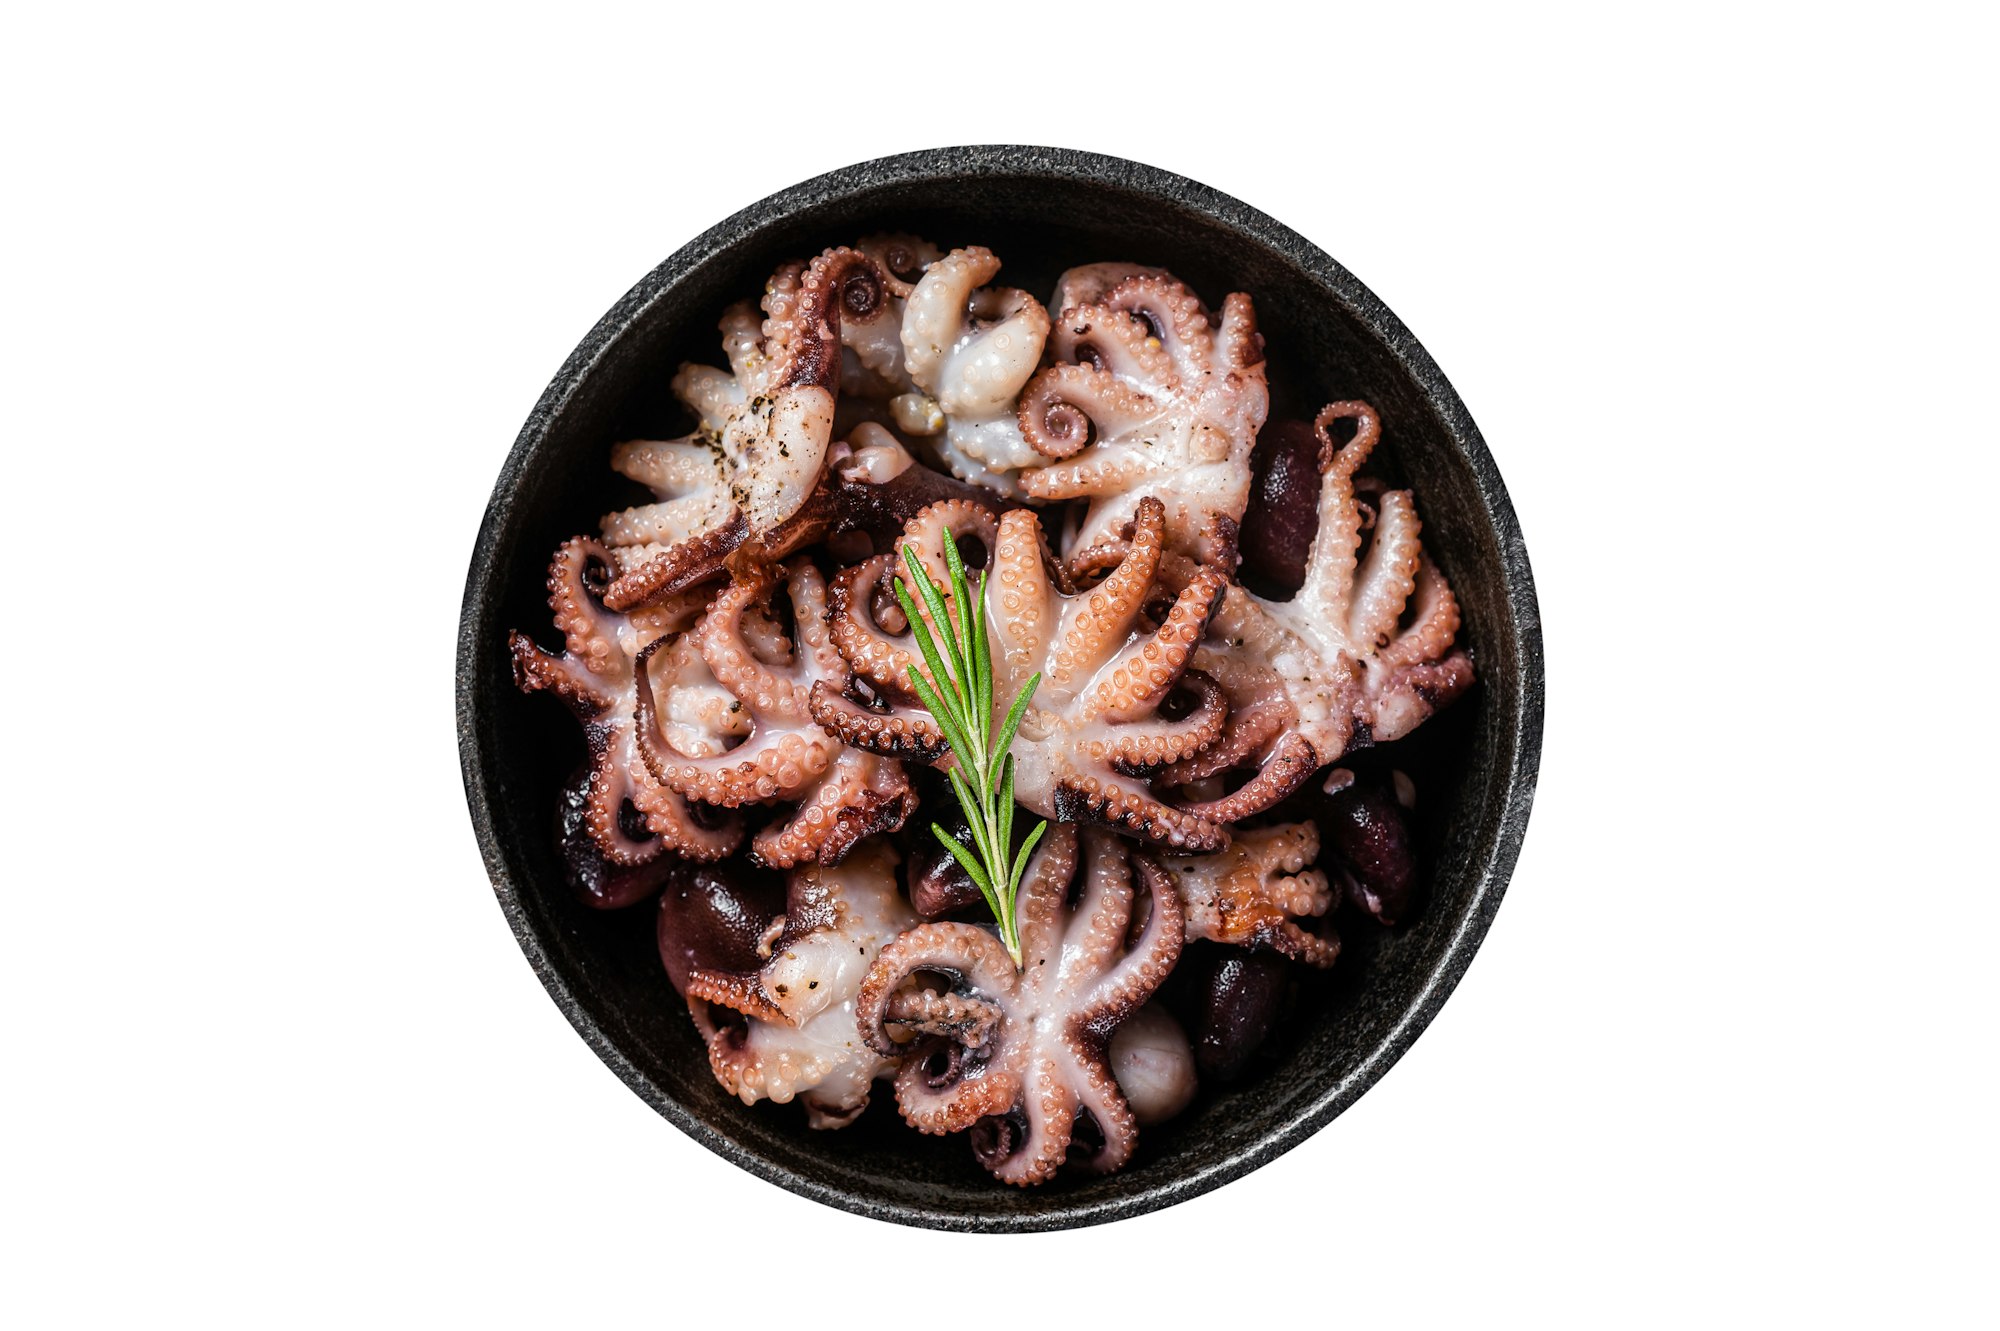 Fried baby octopuses in a skillet with herbs. Isolated on white background.